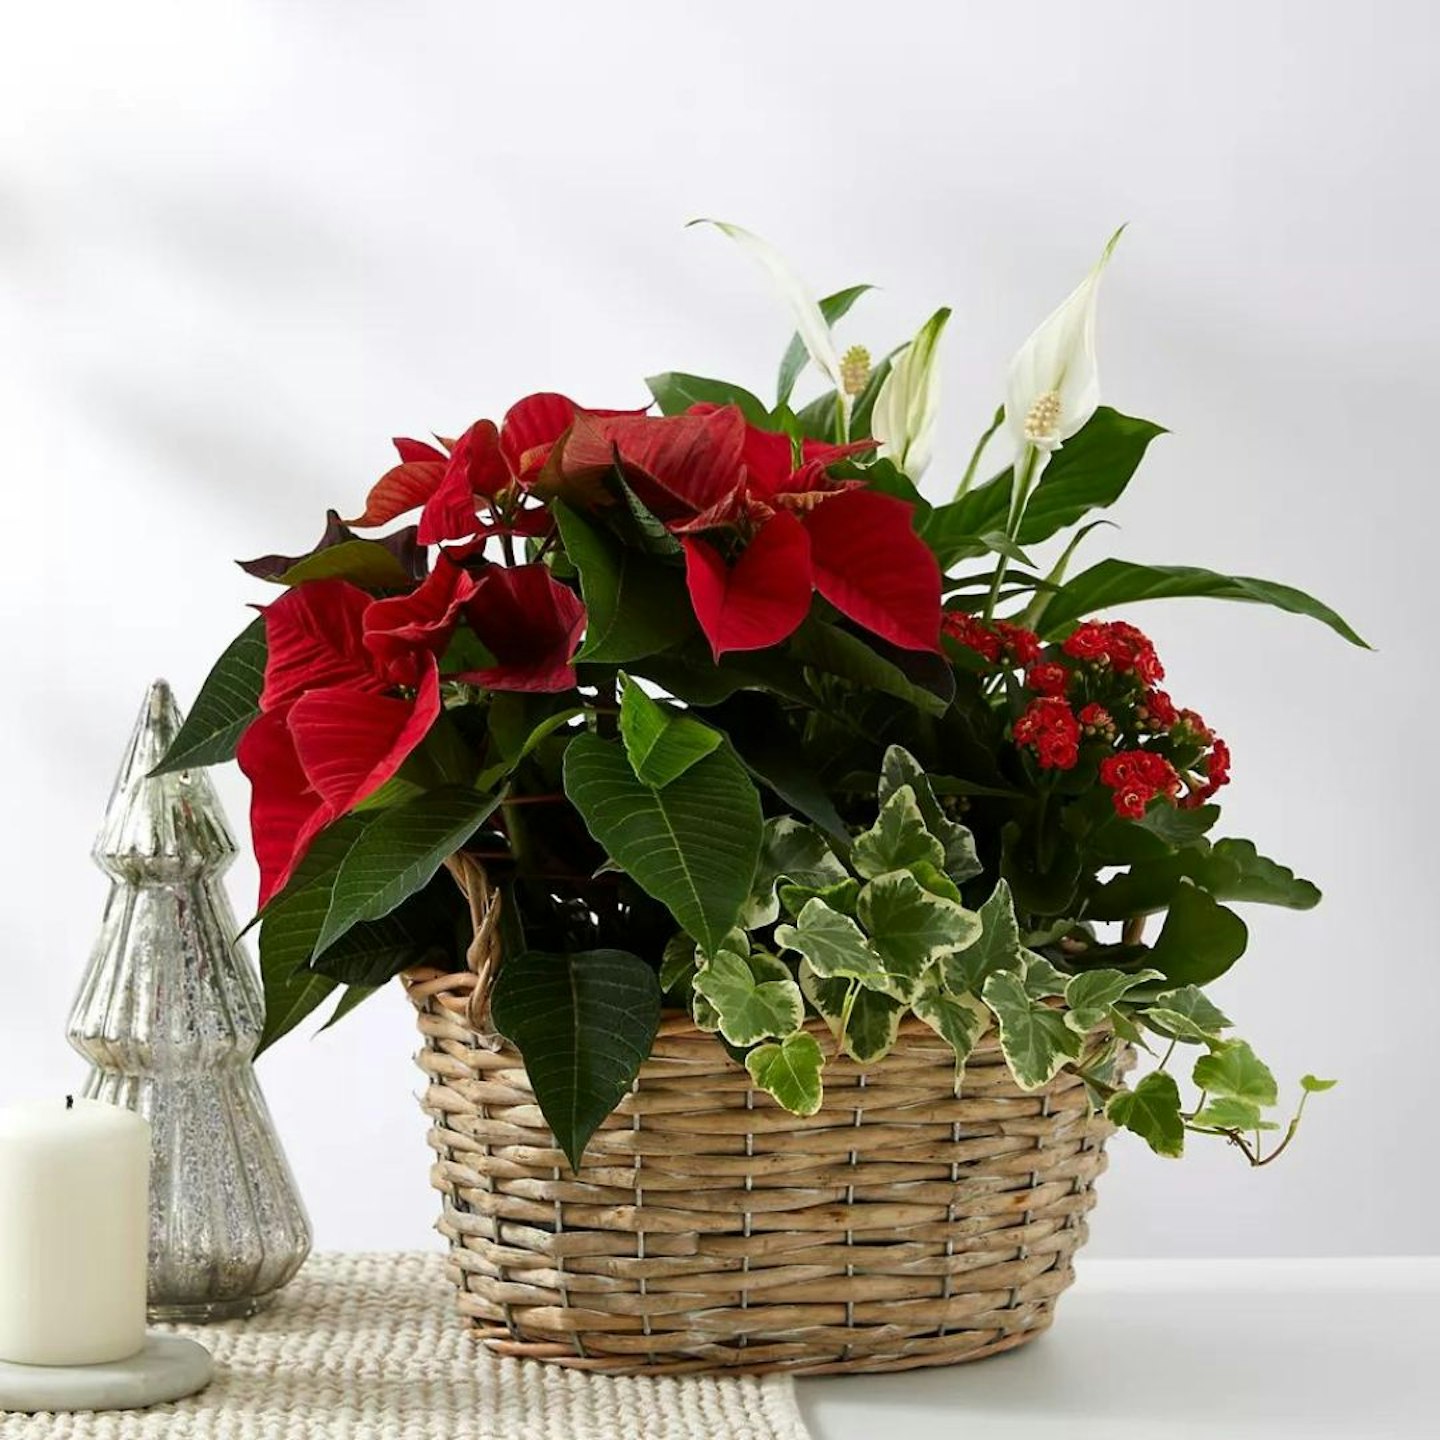 Best Christmas Gifts For Teachers: Festive Planted Basket with Poinsettia